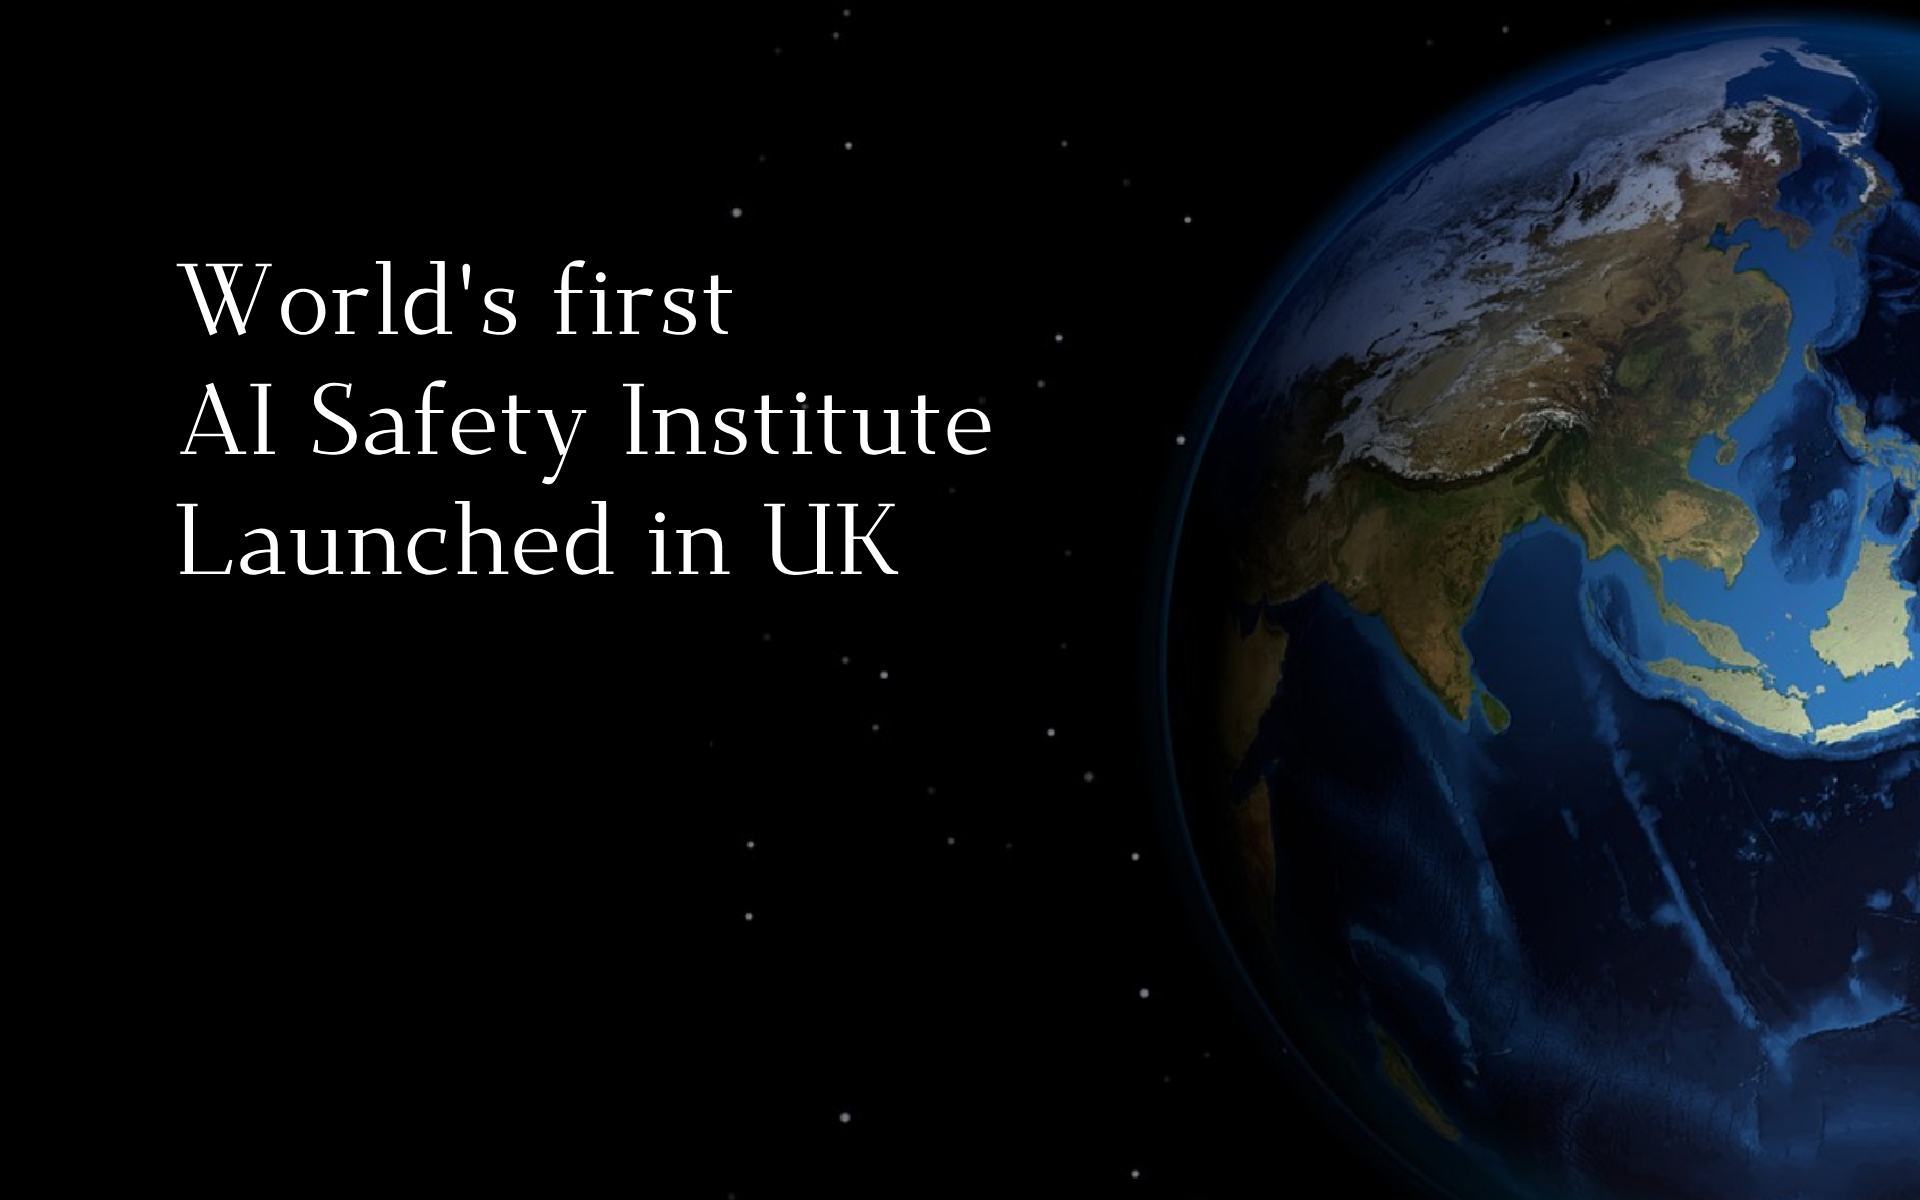 World's first AI Safety Institute launched in United Kingdom, tasked with testing the safety of emerging types of AI.